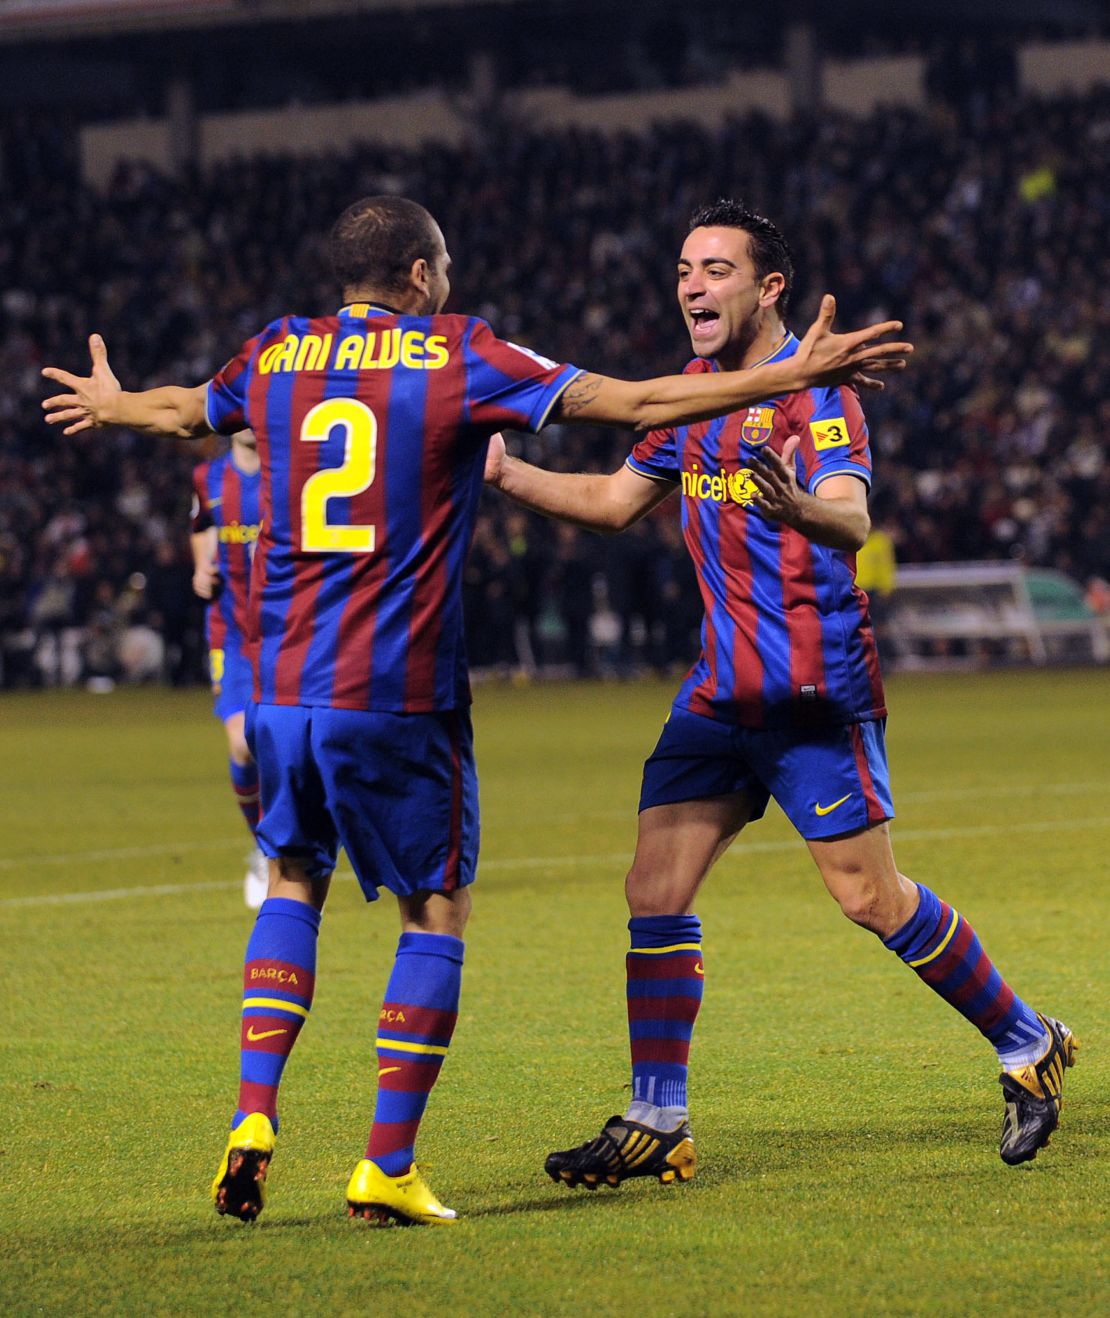 Xavi celebrates with Alves after scoring Barcelona's first goal in the La Liga match between Valladolid and Barcelona on January 23, 2010.